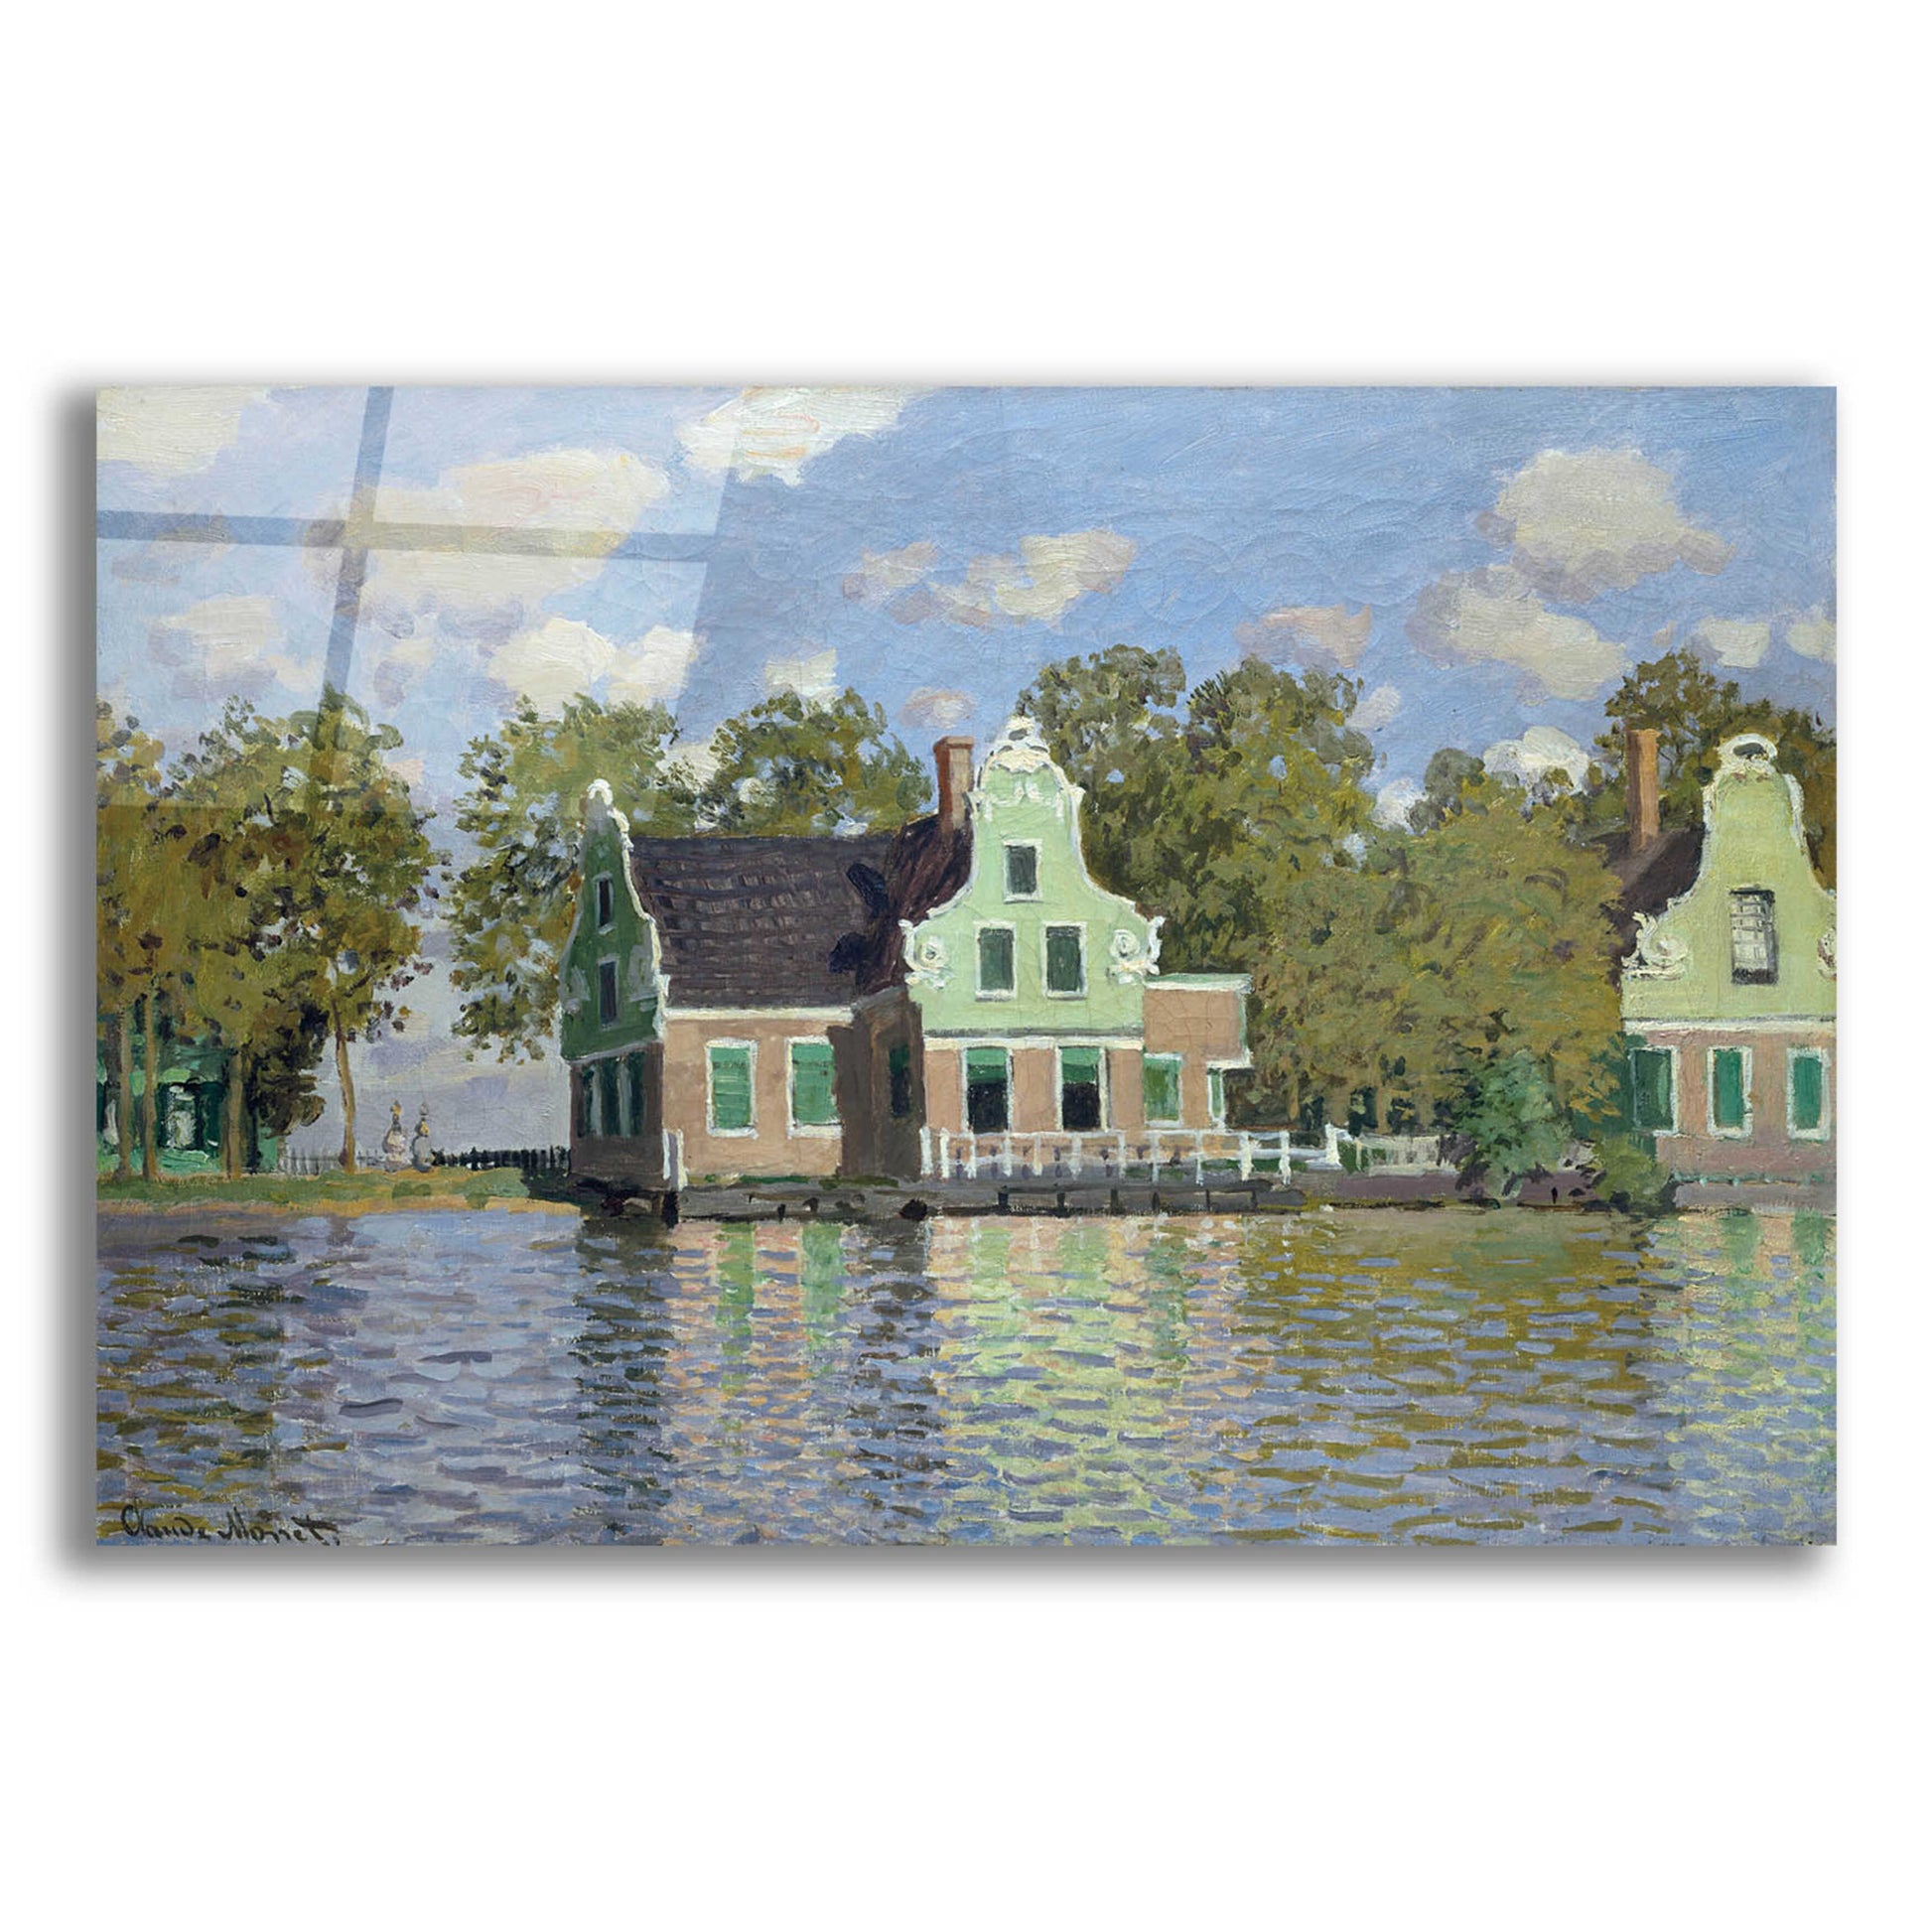 Epic Art 'Houses By The Bank Of The River Zaan' by Claude Monet, Acrylic Glass Wall Art,16x12